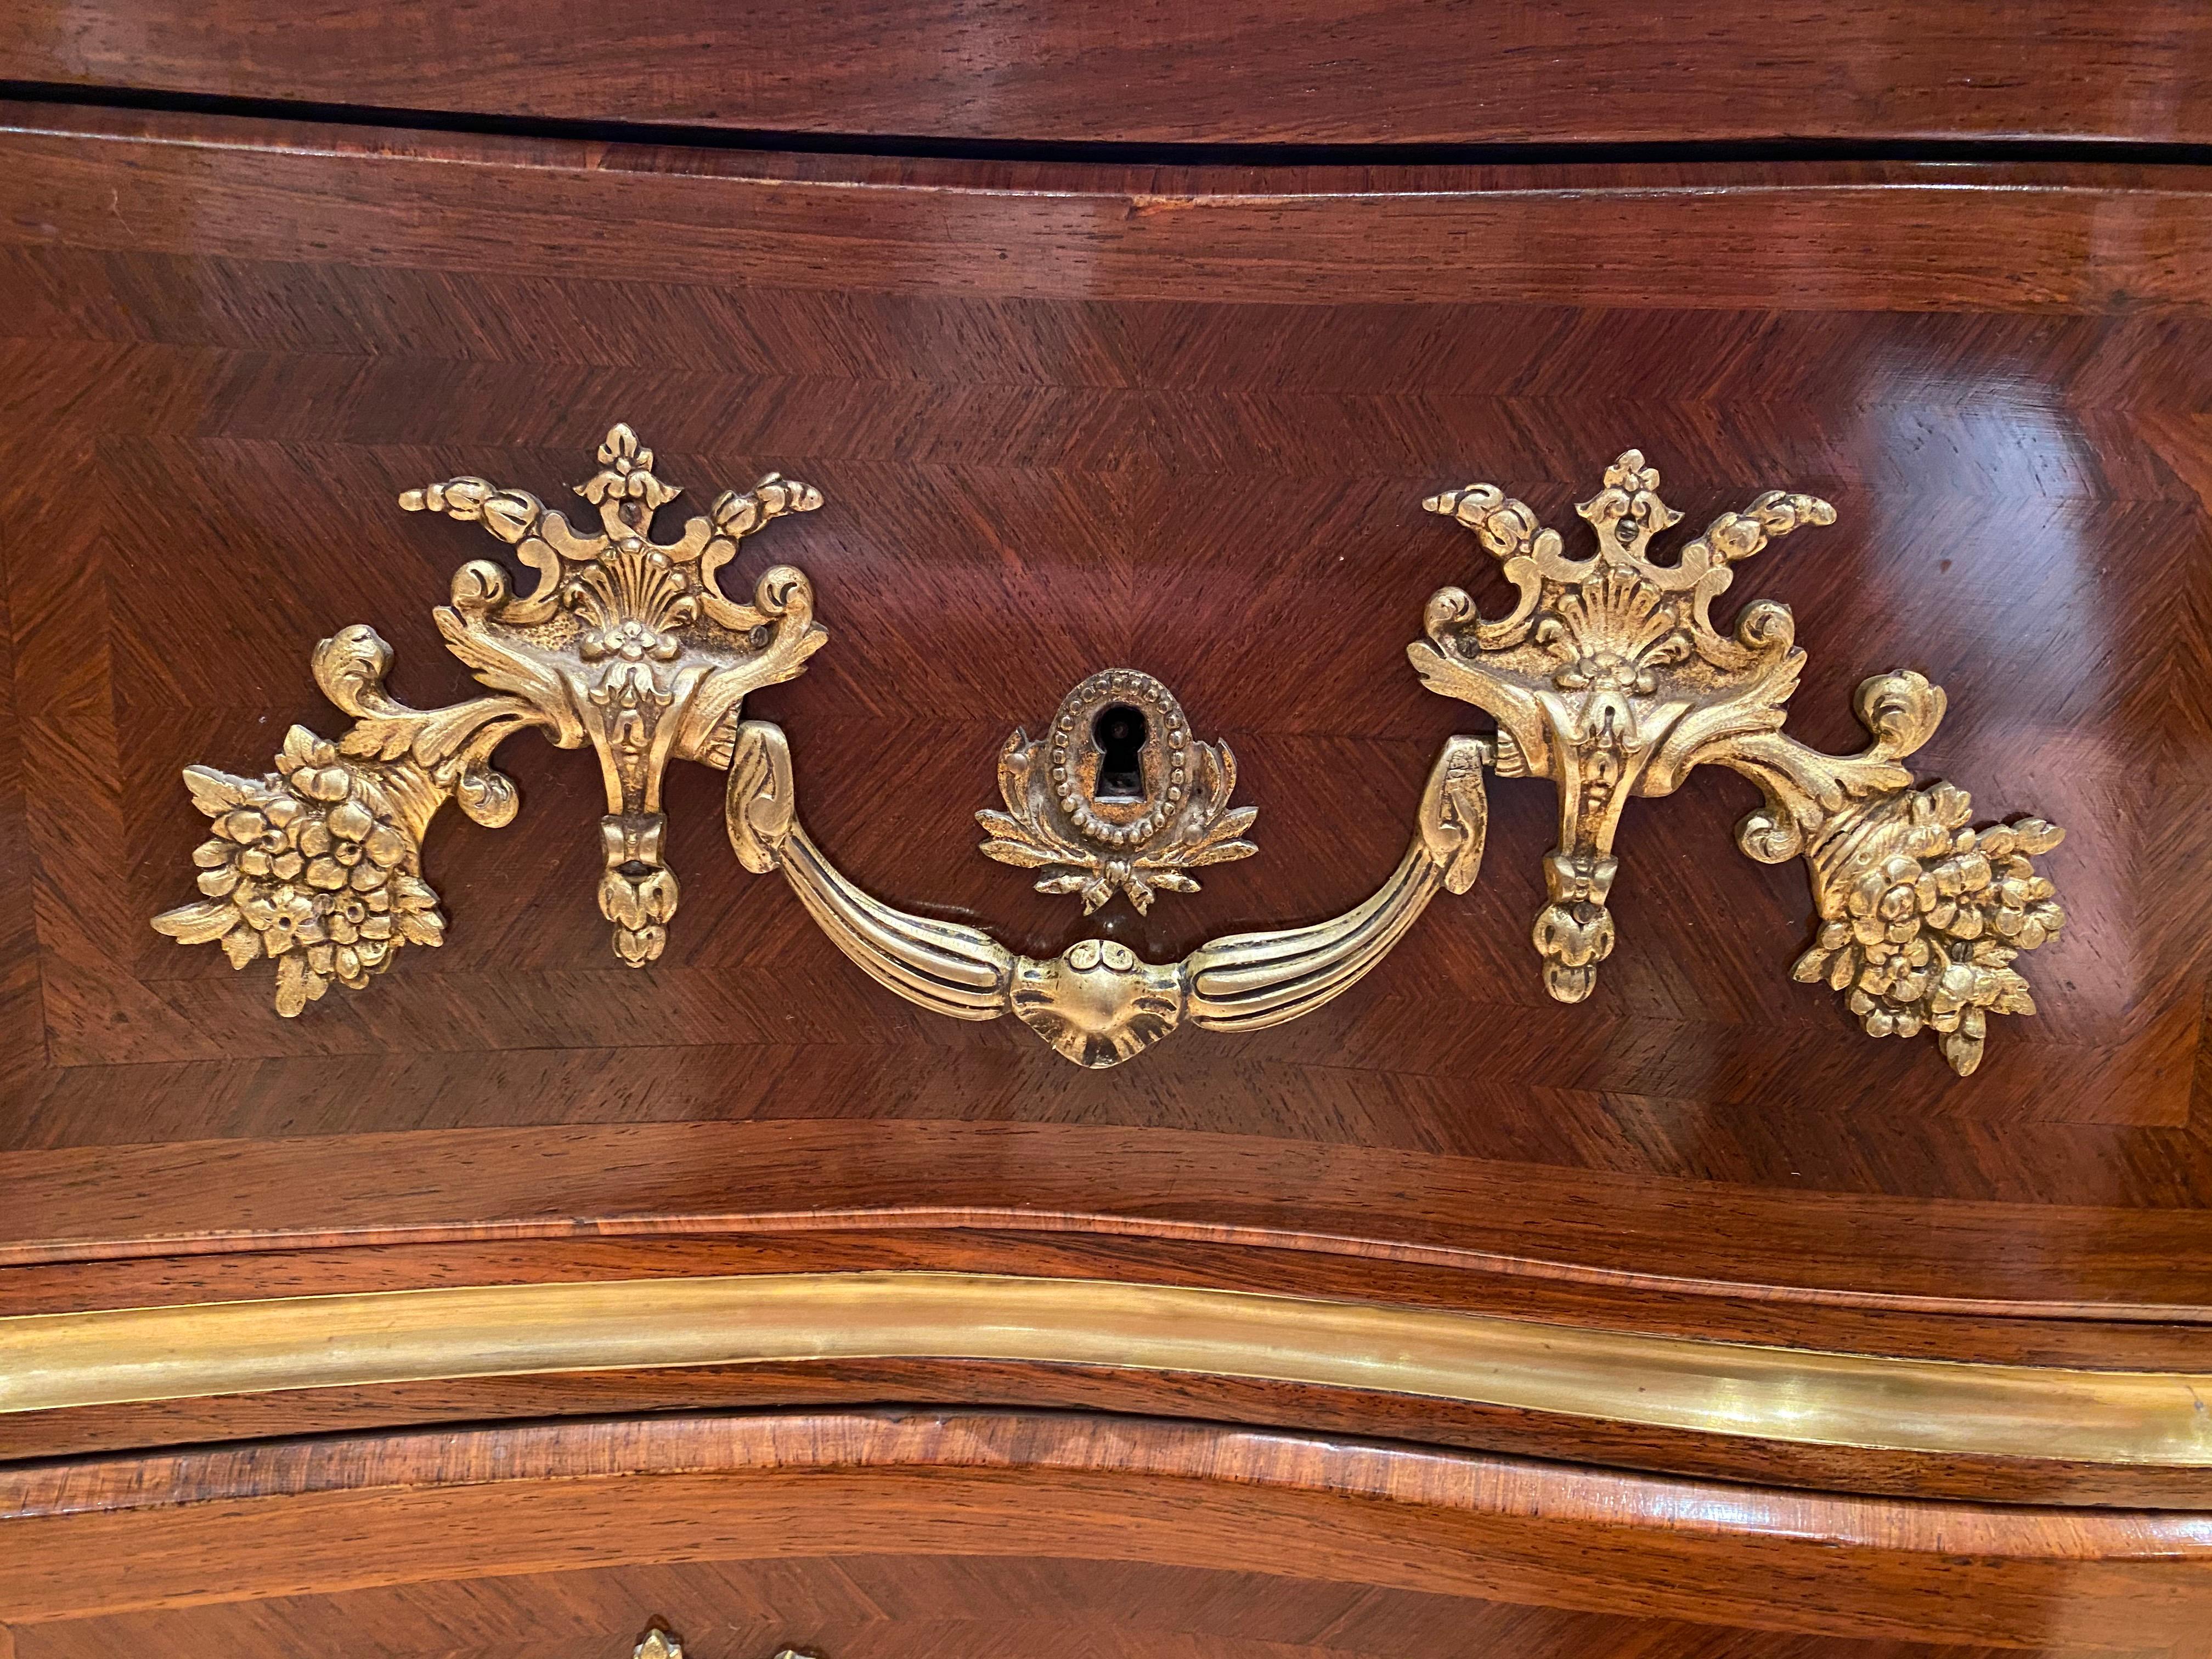 French 19th Century Louis XV St. Kingwood, Tulipwood and Ormolu Commode For Sale 1